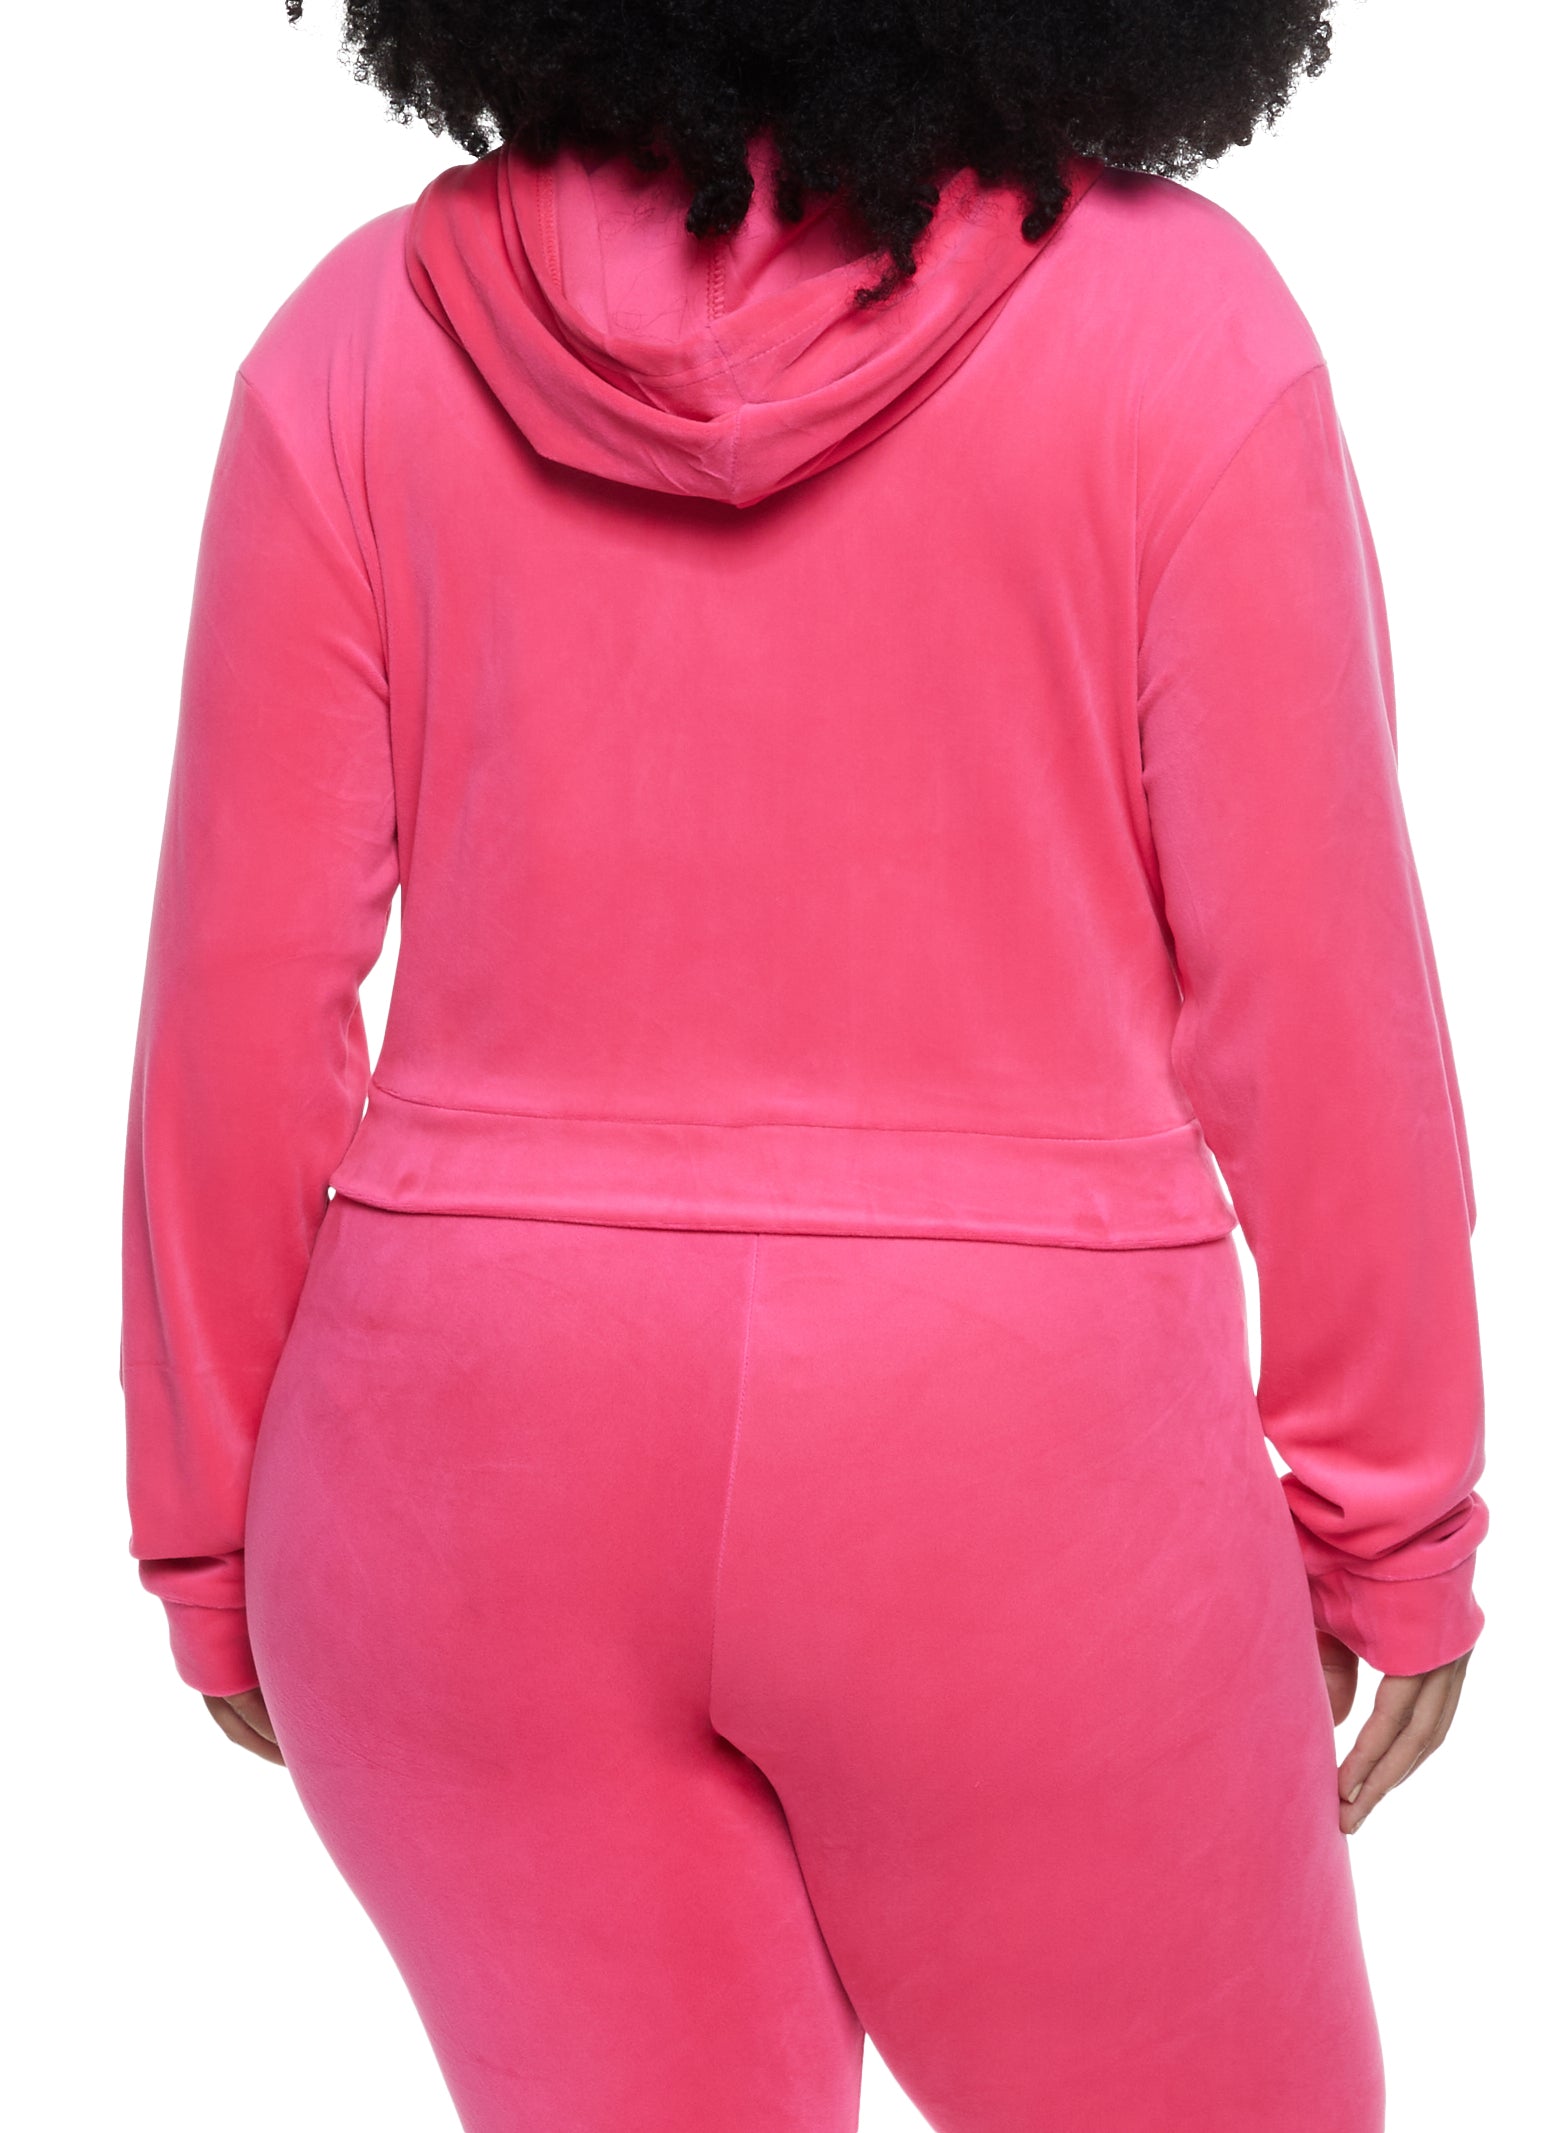 Plus Size Velour Zip Up Cropped Hoodie